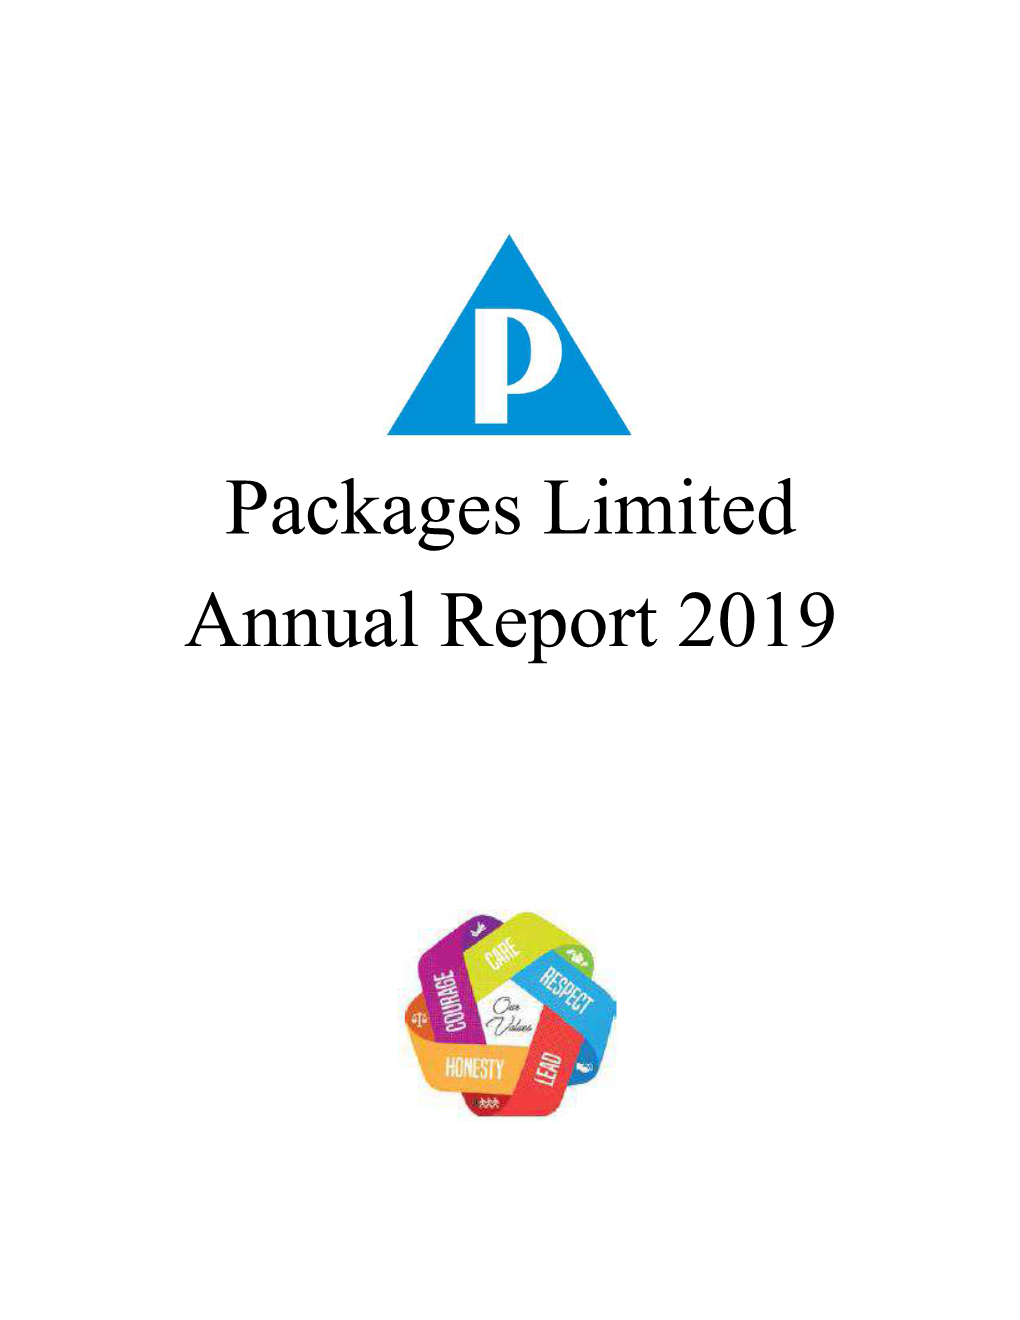 Packages Limited Annual Report 2019